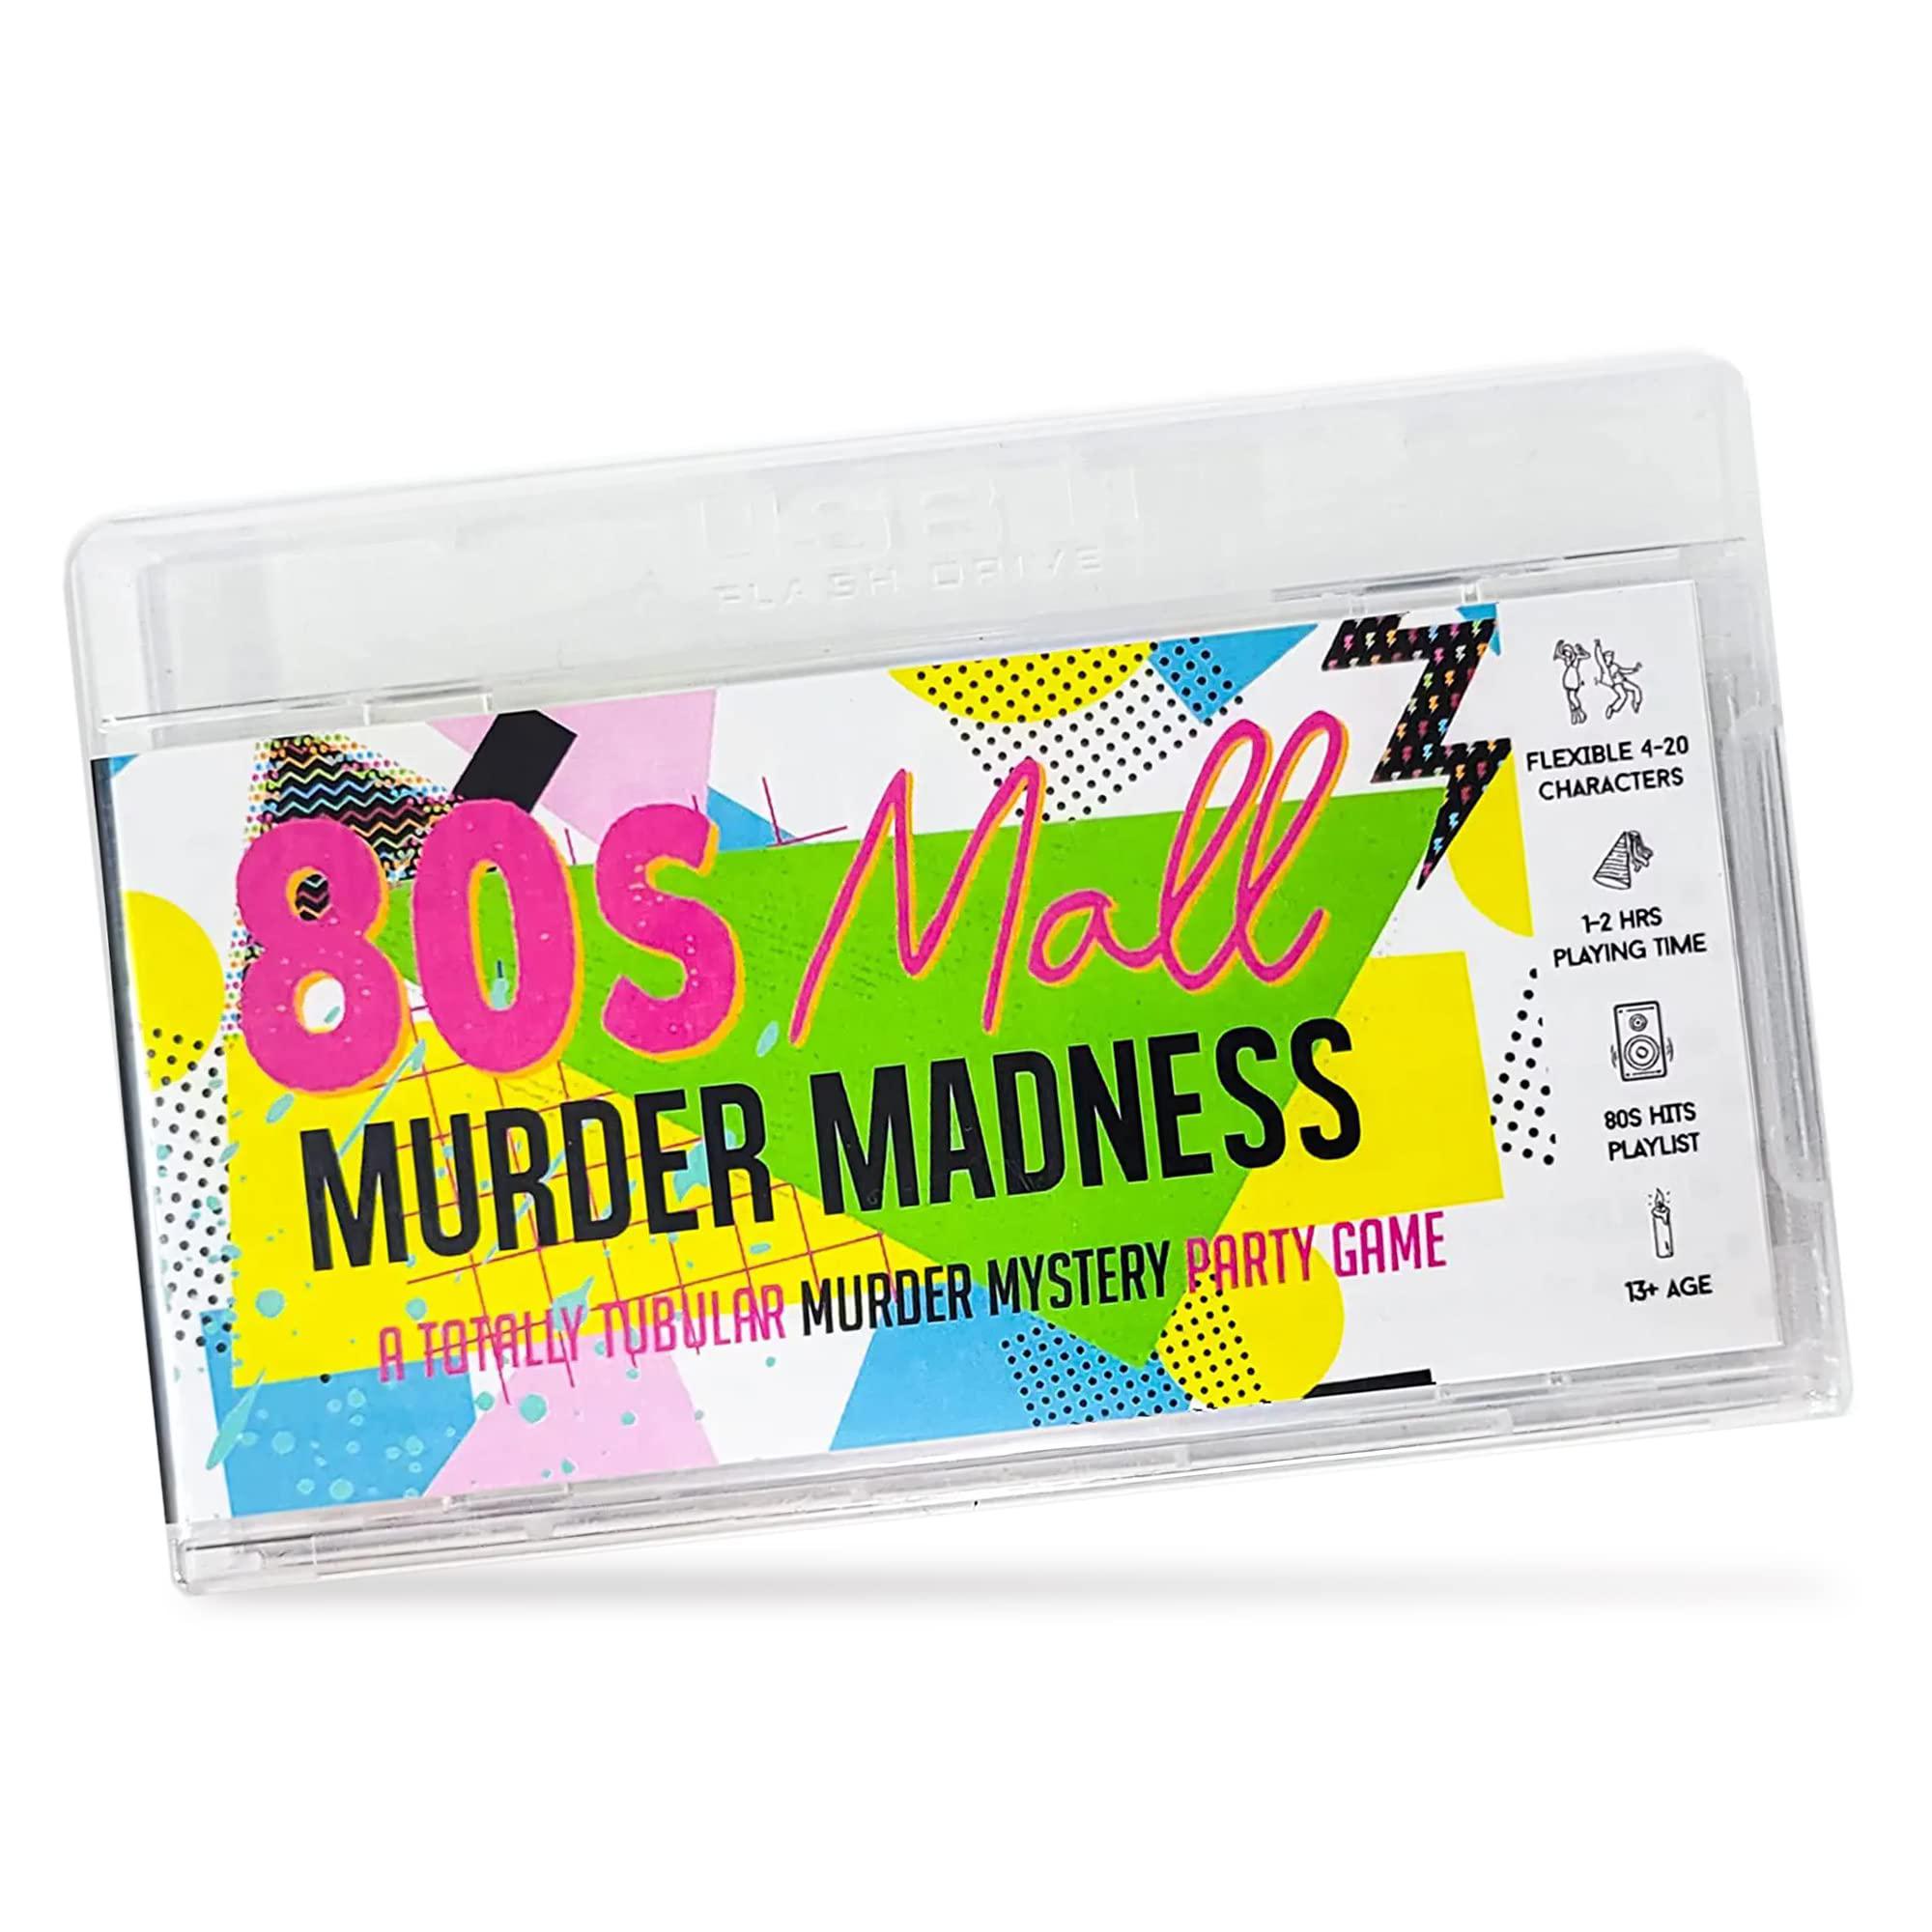 broadway murder mysteries Broadway Murder Myst 80s Mall Murder Madness  A Totally Tubular Murder Mystery games  Mystery games for Ages 13+, in-Person & Virtual Detective game,